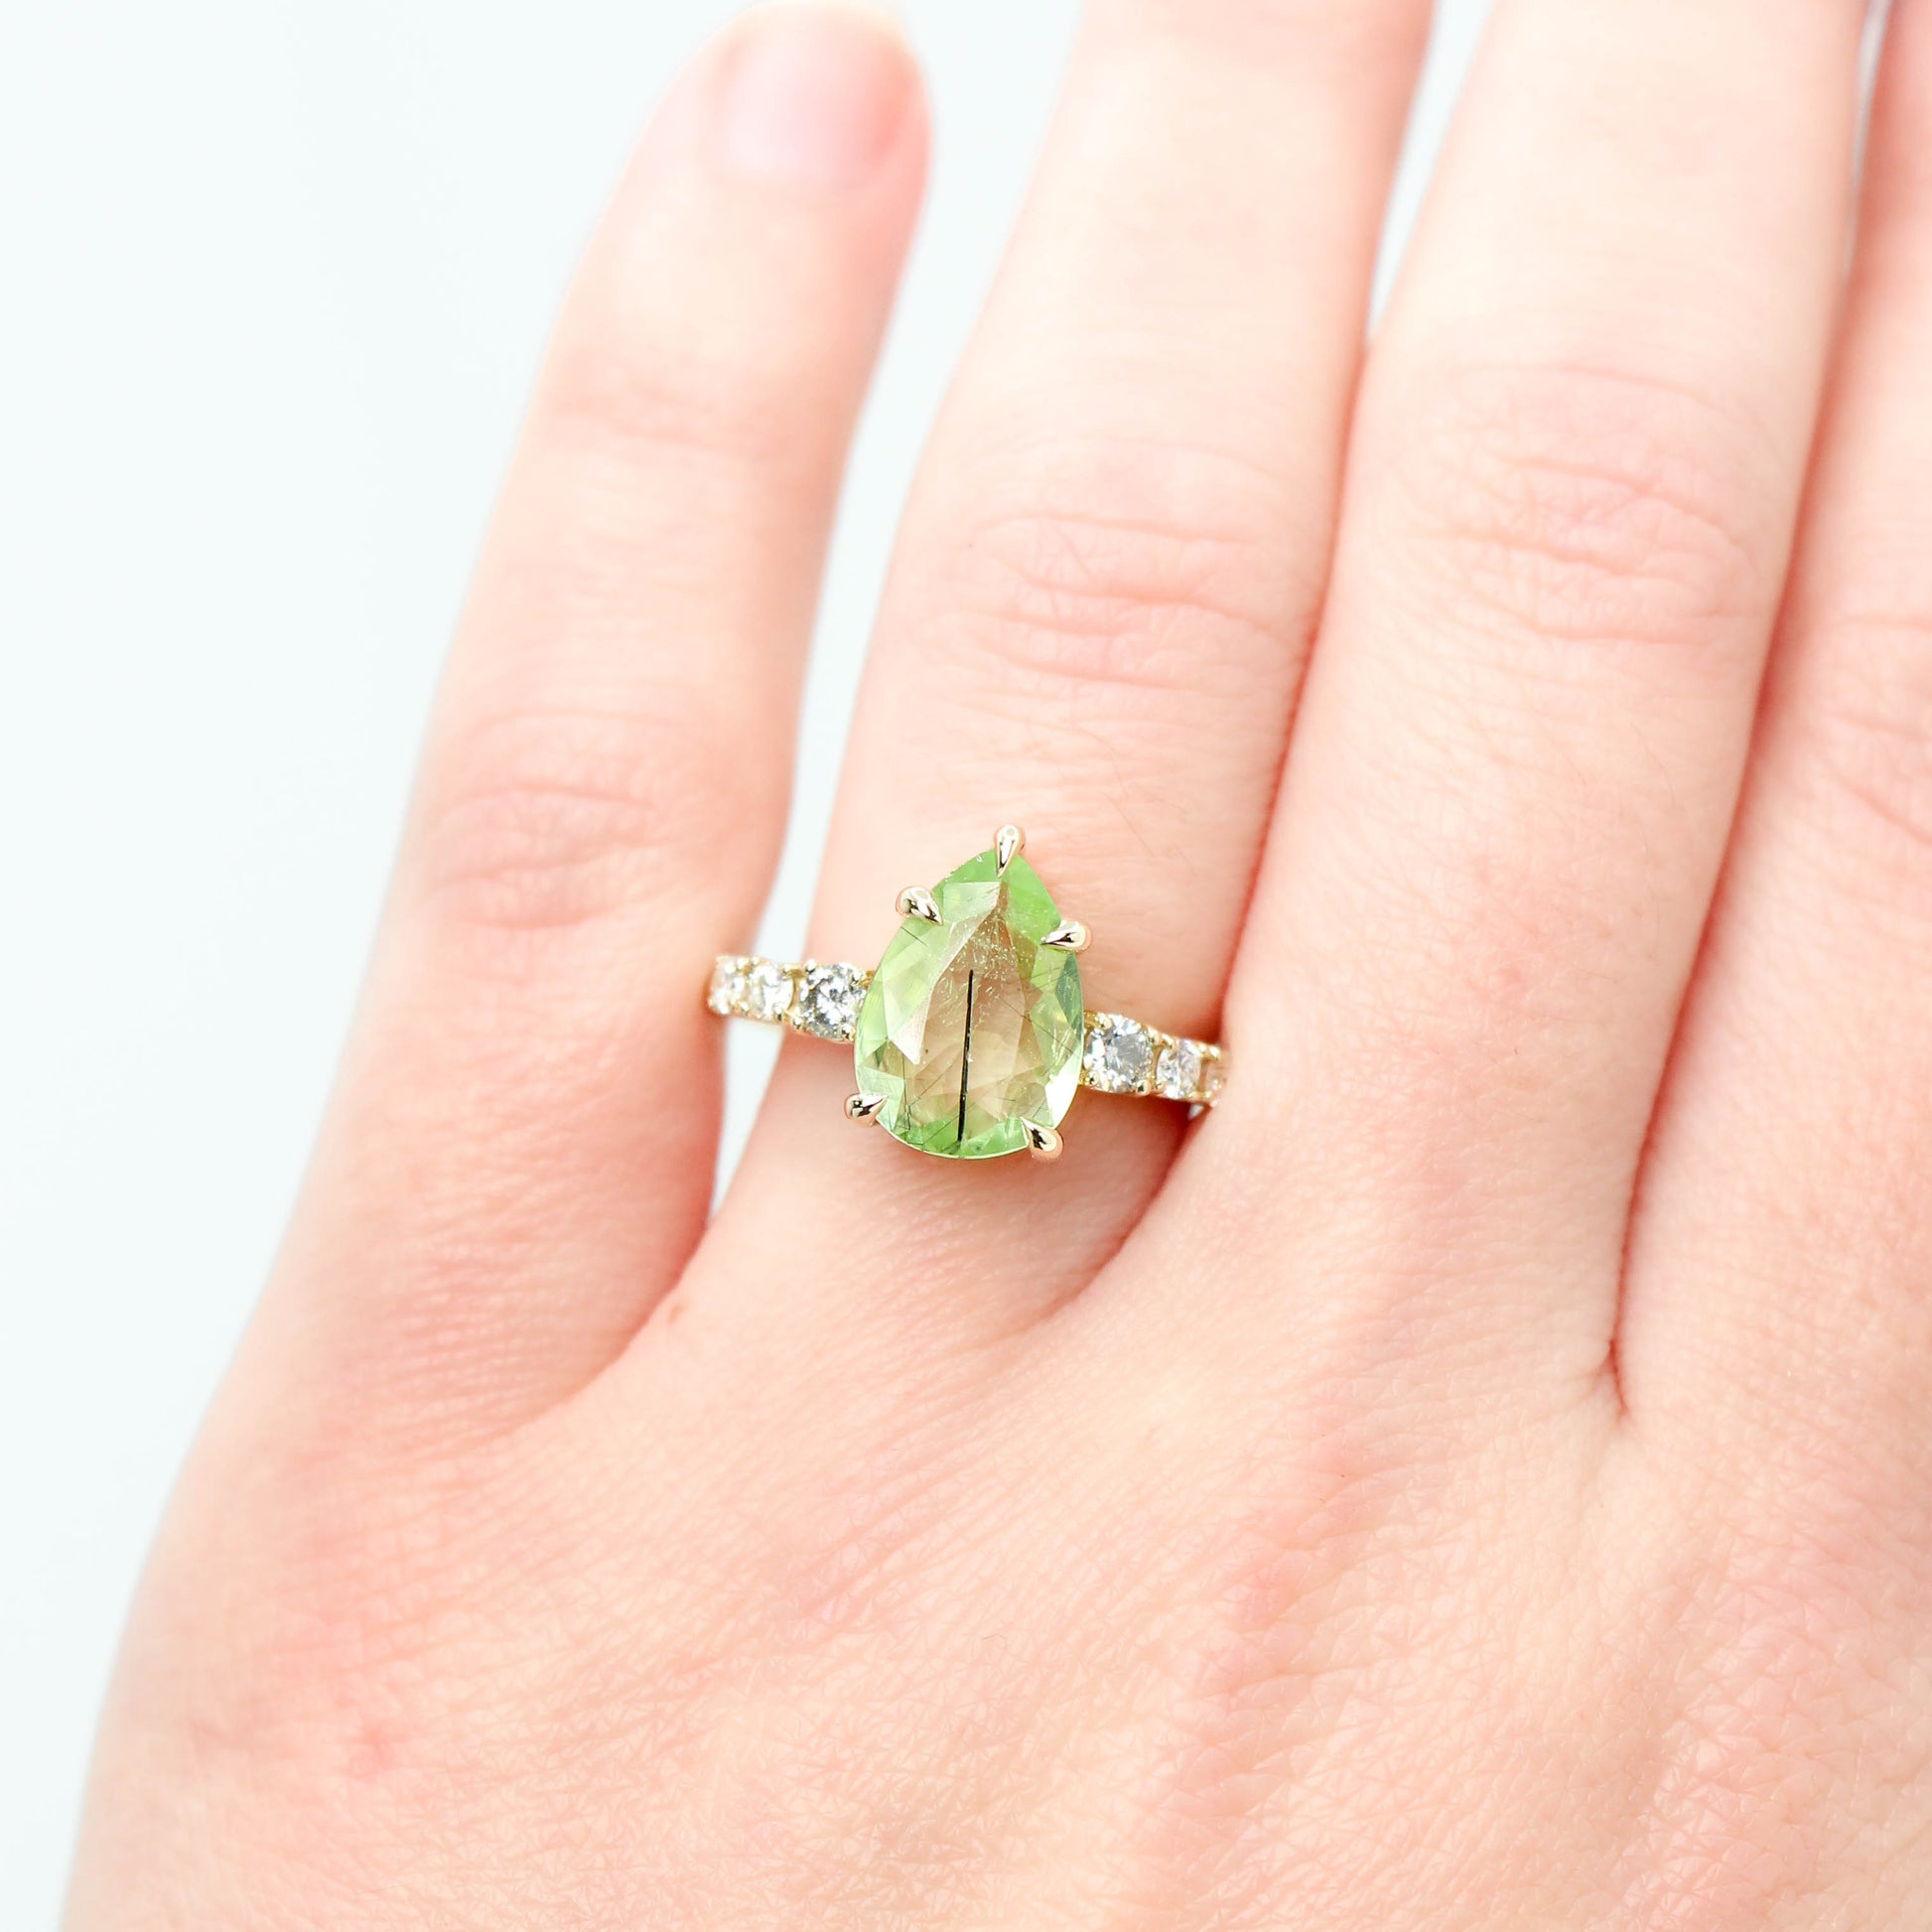 Tina Ring with a 2.58 Carat Light Green Pear Peridot and Gray and White Accent Diamonds in 14k Yellow Gold - Ready to Size and Ship - Midwinter Co. Alternative Bridal Rings and Modern Fine Jewelry